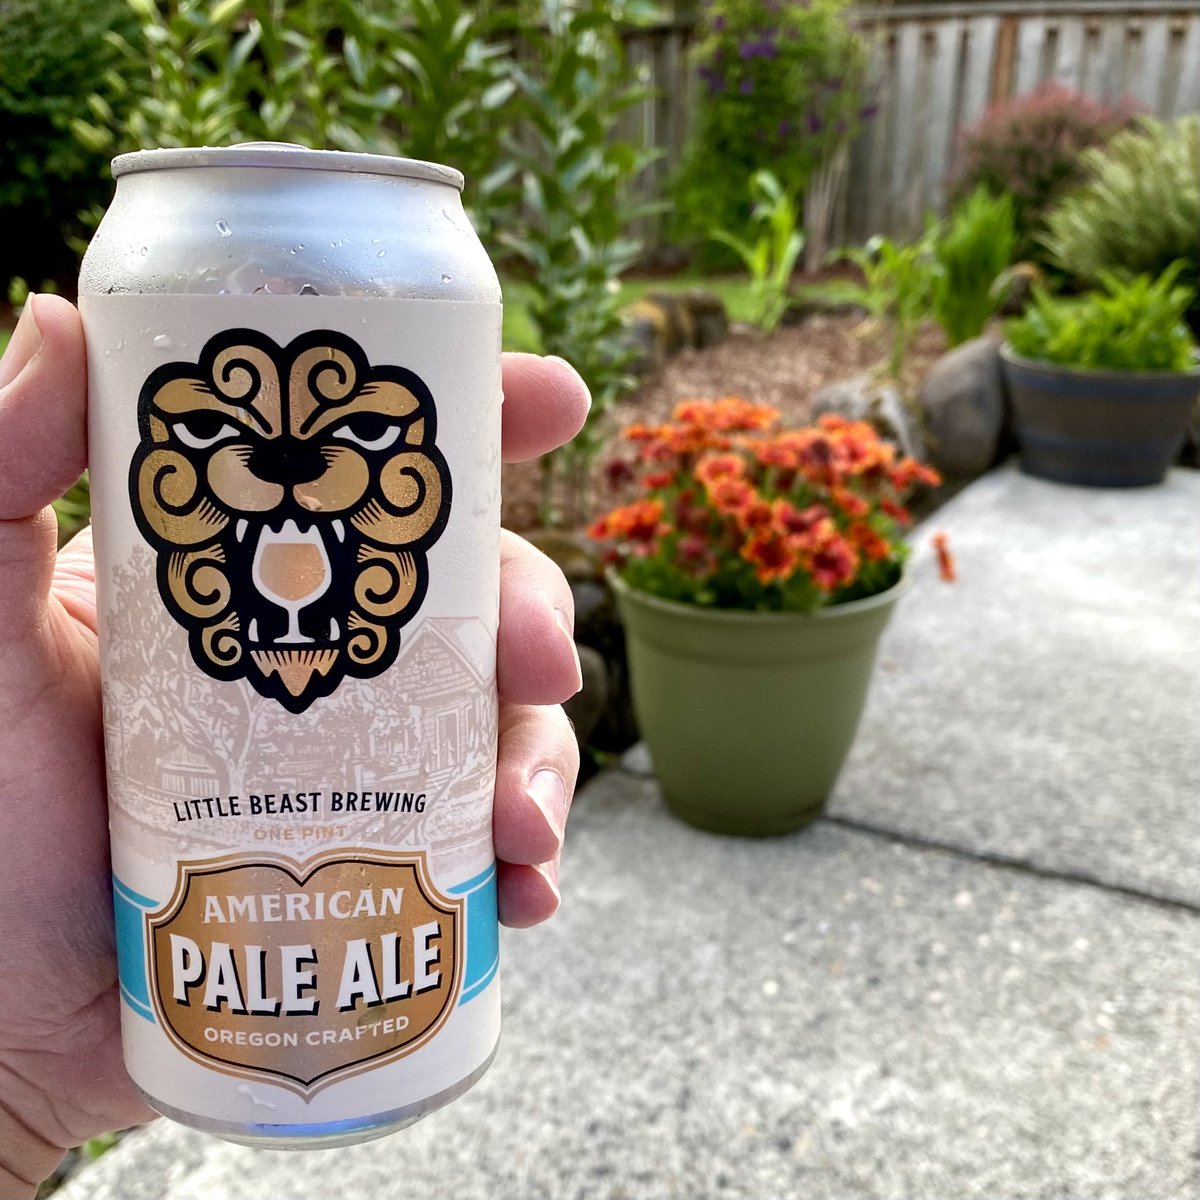 Porch beer! @LittleBeastBeer’s “American Pale Ale”. 5.2% is perfect (and delicious) for an 88 degree evening. Cheers! #CraftBeer #OregonBeer #SummerSolstice 🍻